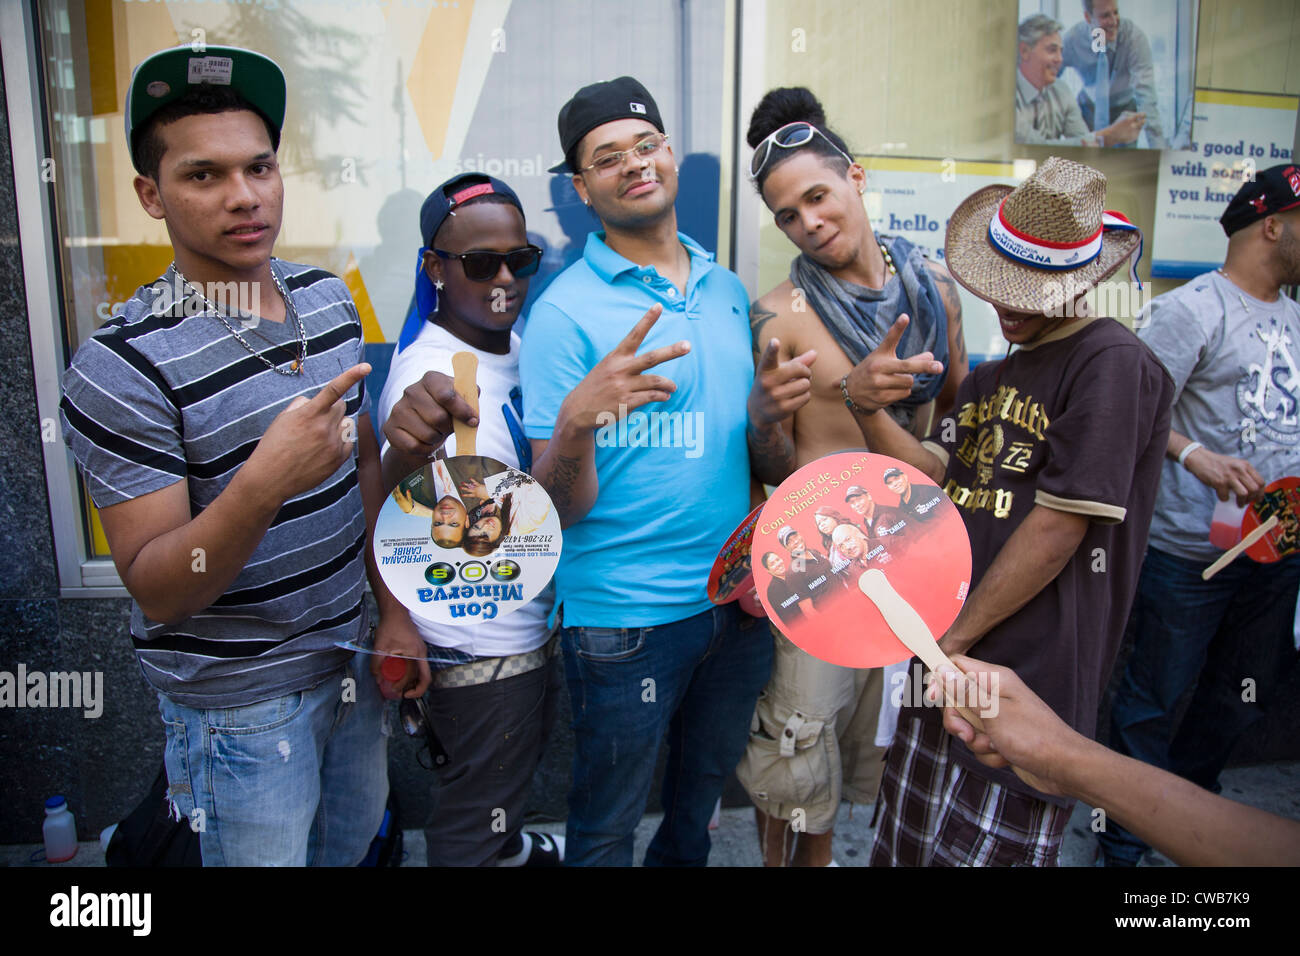 A group of energetic young men on Avenue of the Americas for the Dominican Day Parade in New York City. Stock Photo